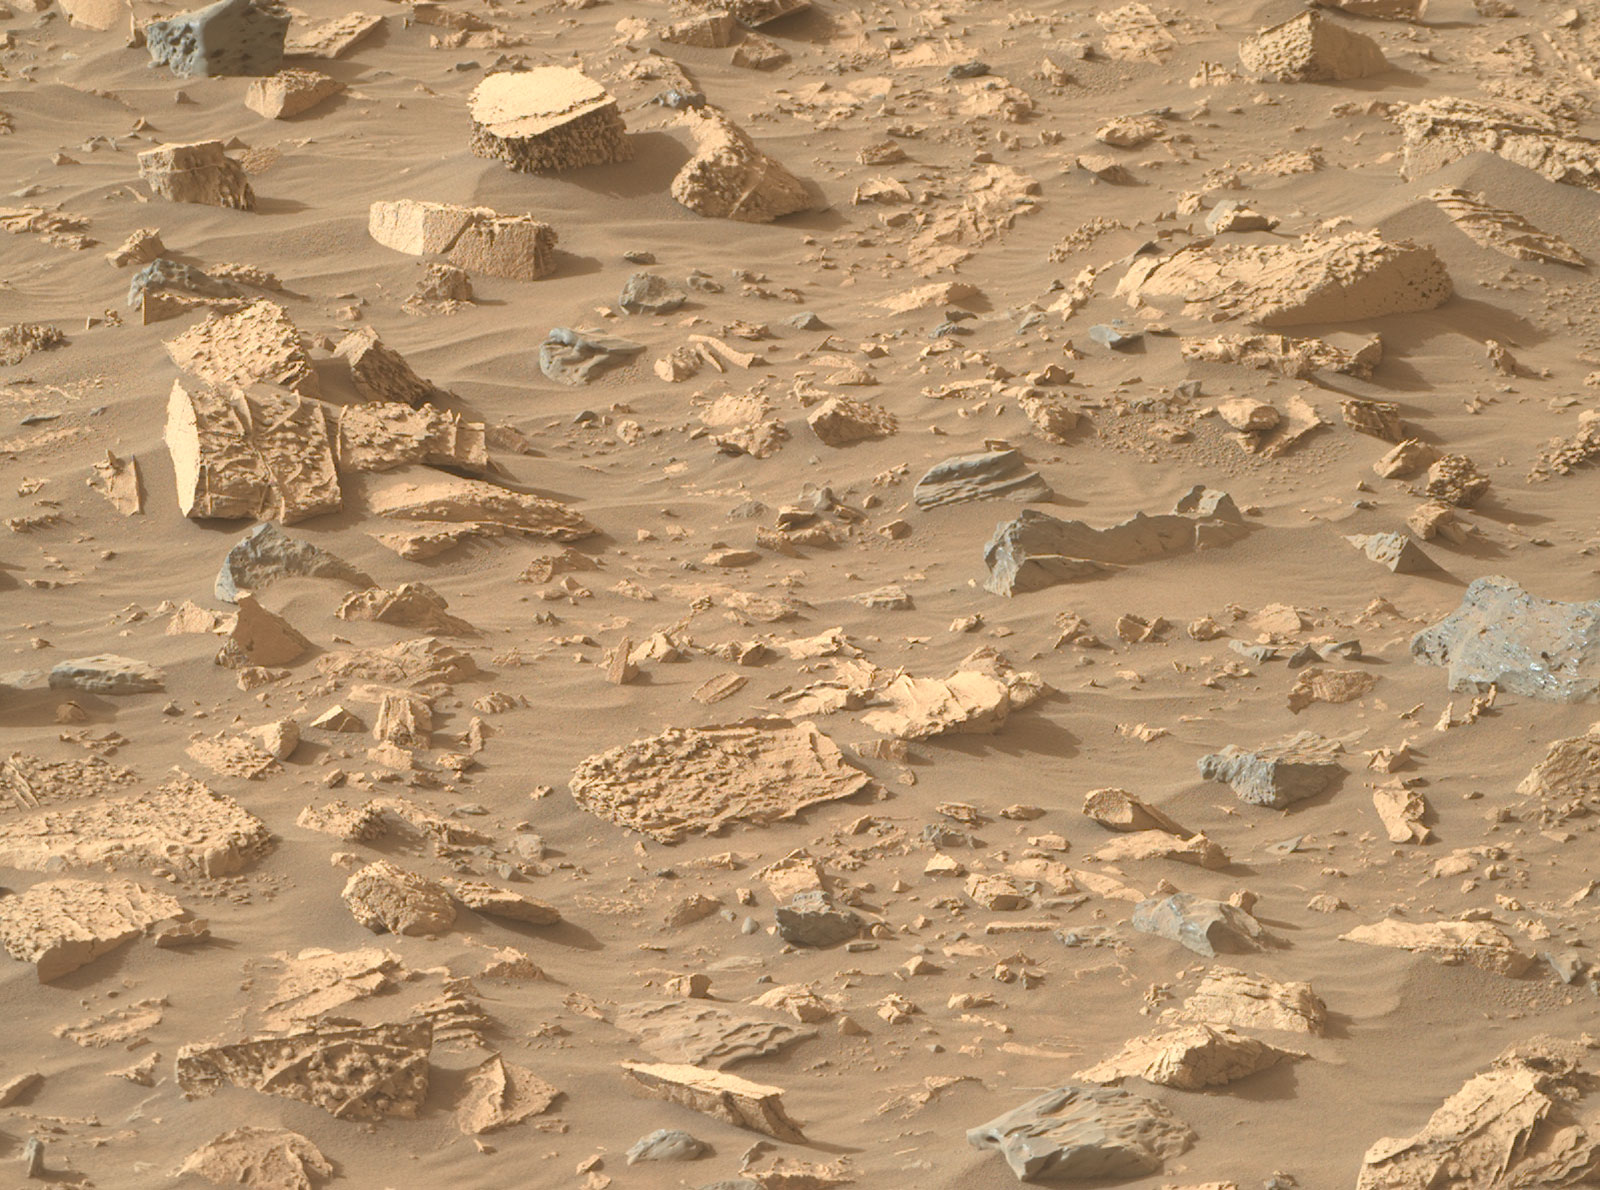 Perseverance Finds Popcorn on Planet Mars